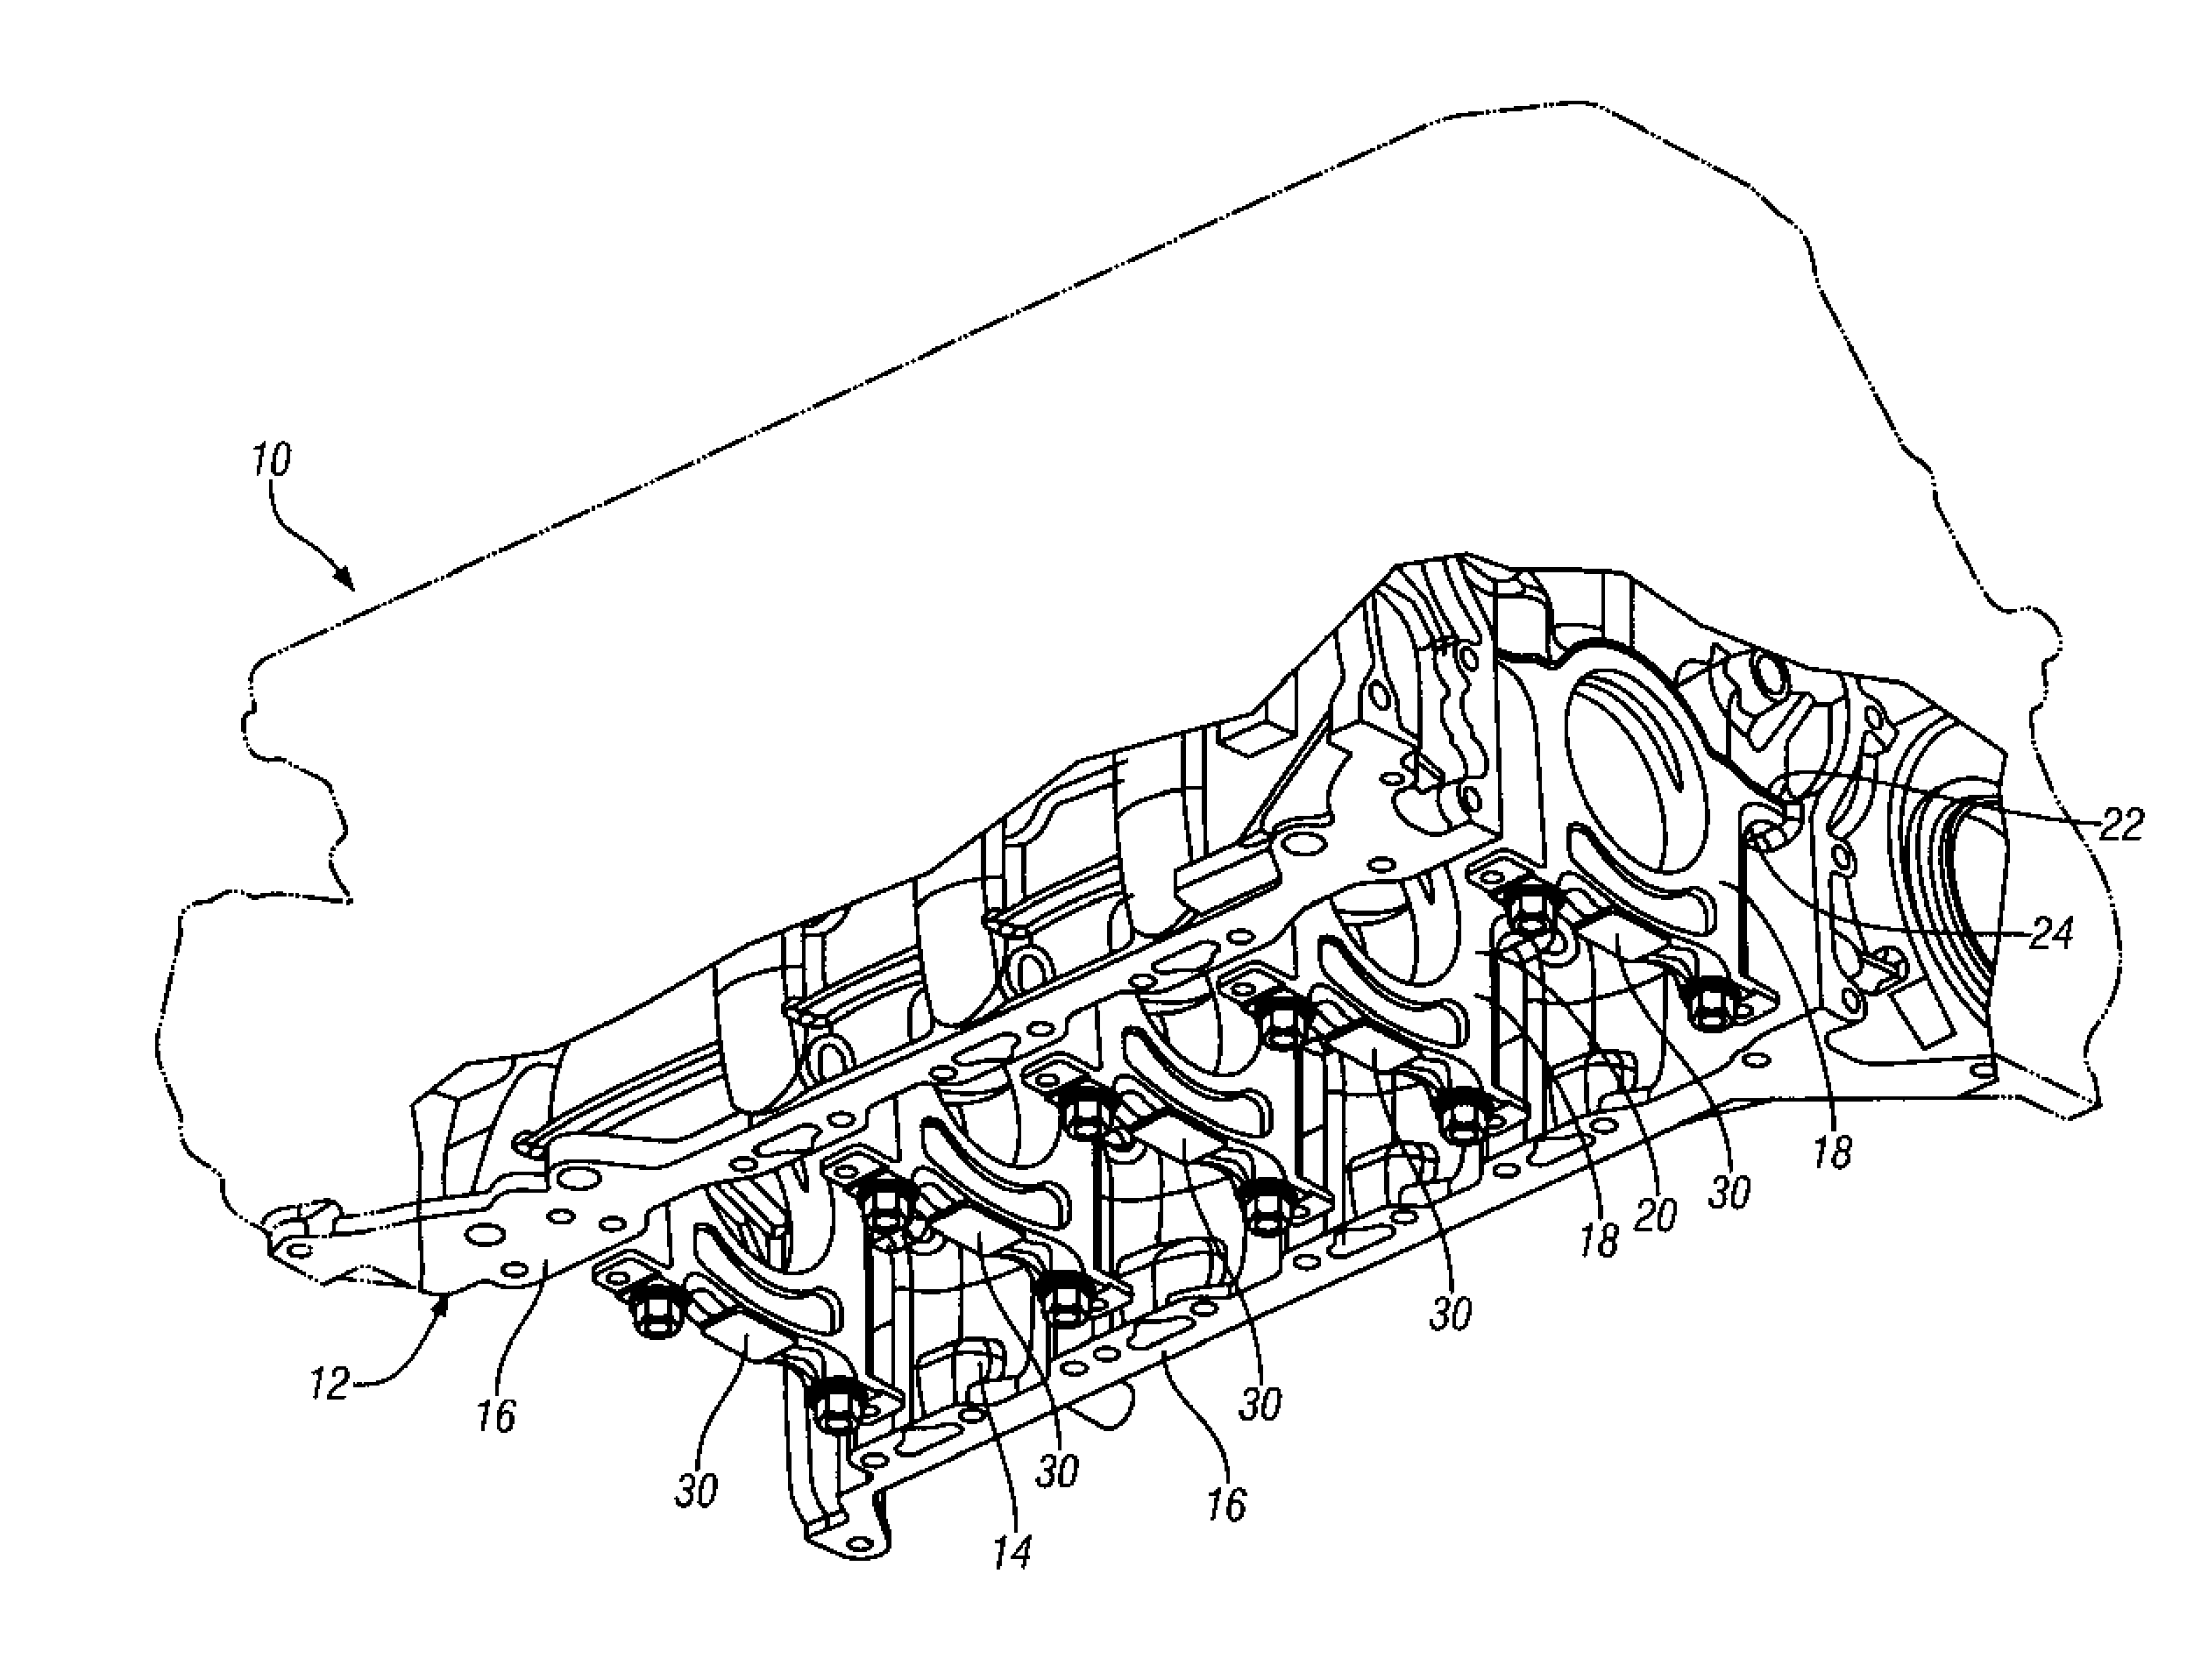 Engine and method for improved crankcase fatigue strength with fracture-split main bearing caps